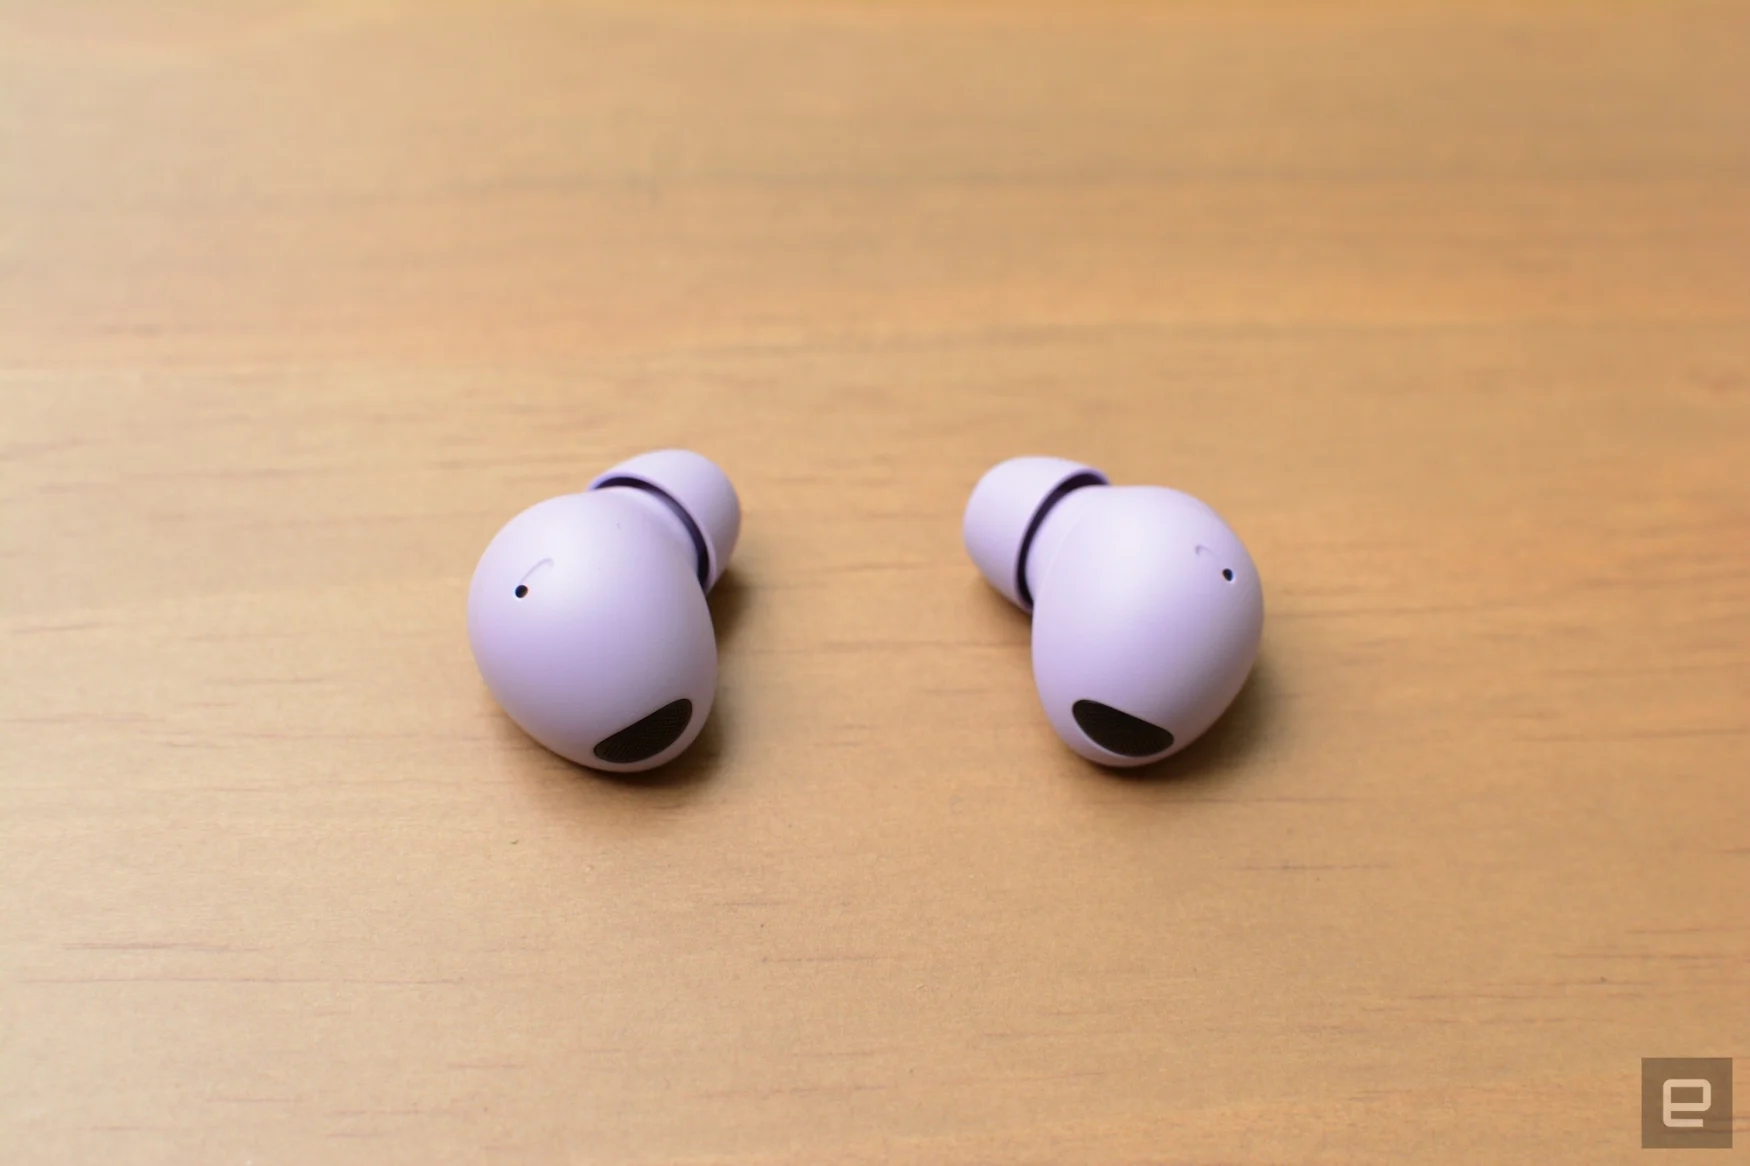 The Galaxy Buds 2 Pro are Samsung’s best earbuds yet, and it’s not even close. Thanks to a huge improvement to sound quality, better noise cancellation and a host of handy features, this is the most well-rounded true wireless product from the company so far. But even with all of its gains, the best is still reserved for the Samsung faithful, which means these are only a truly great option for owner’s of one of the company’s devices. 